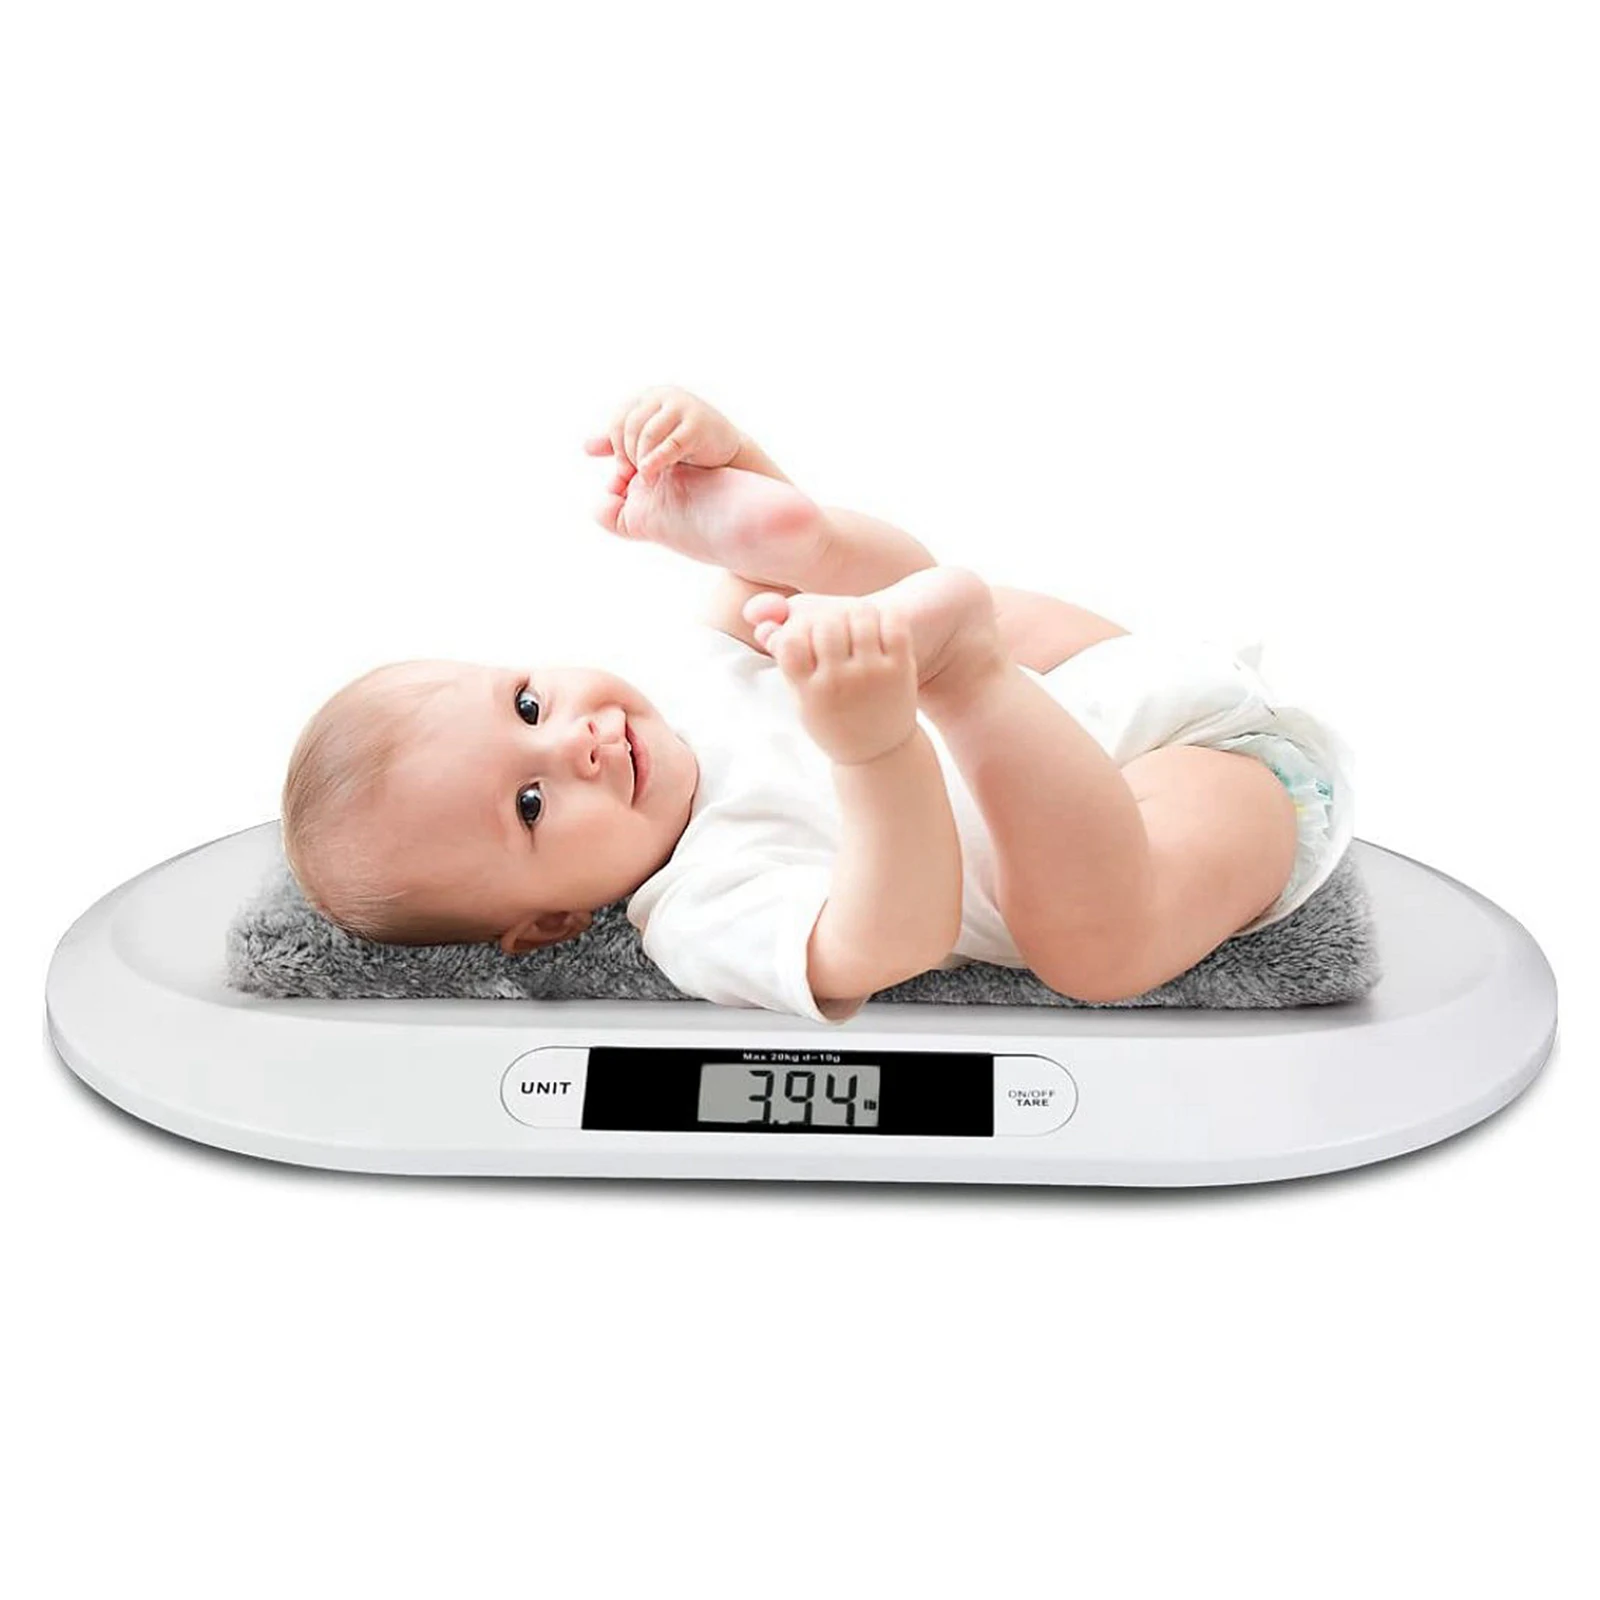 Digital Baby Scale Ugraded Family Digital Scale for Infant/Toddler/Adults/Pet Weight Meter Measuring images - 2